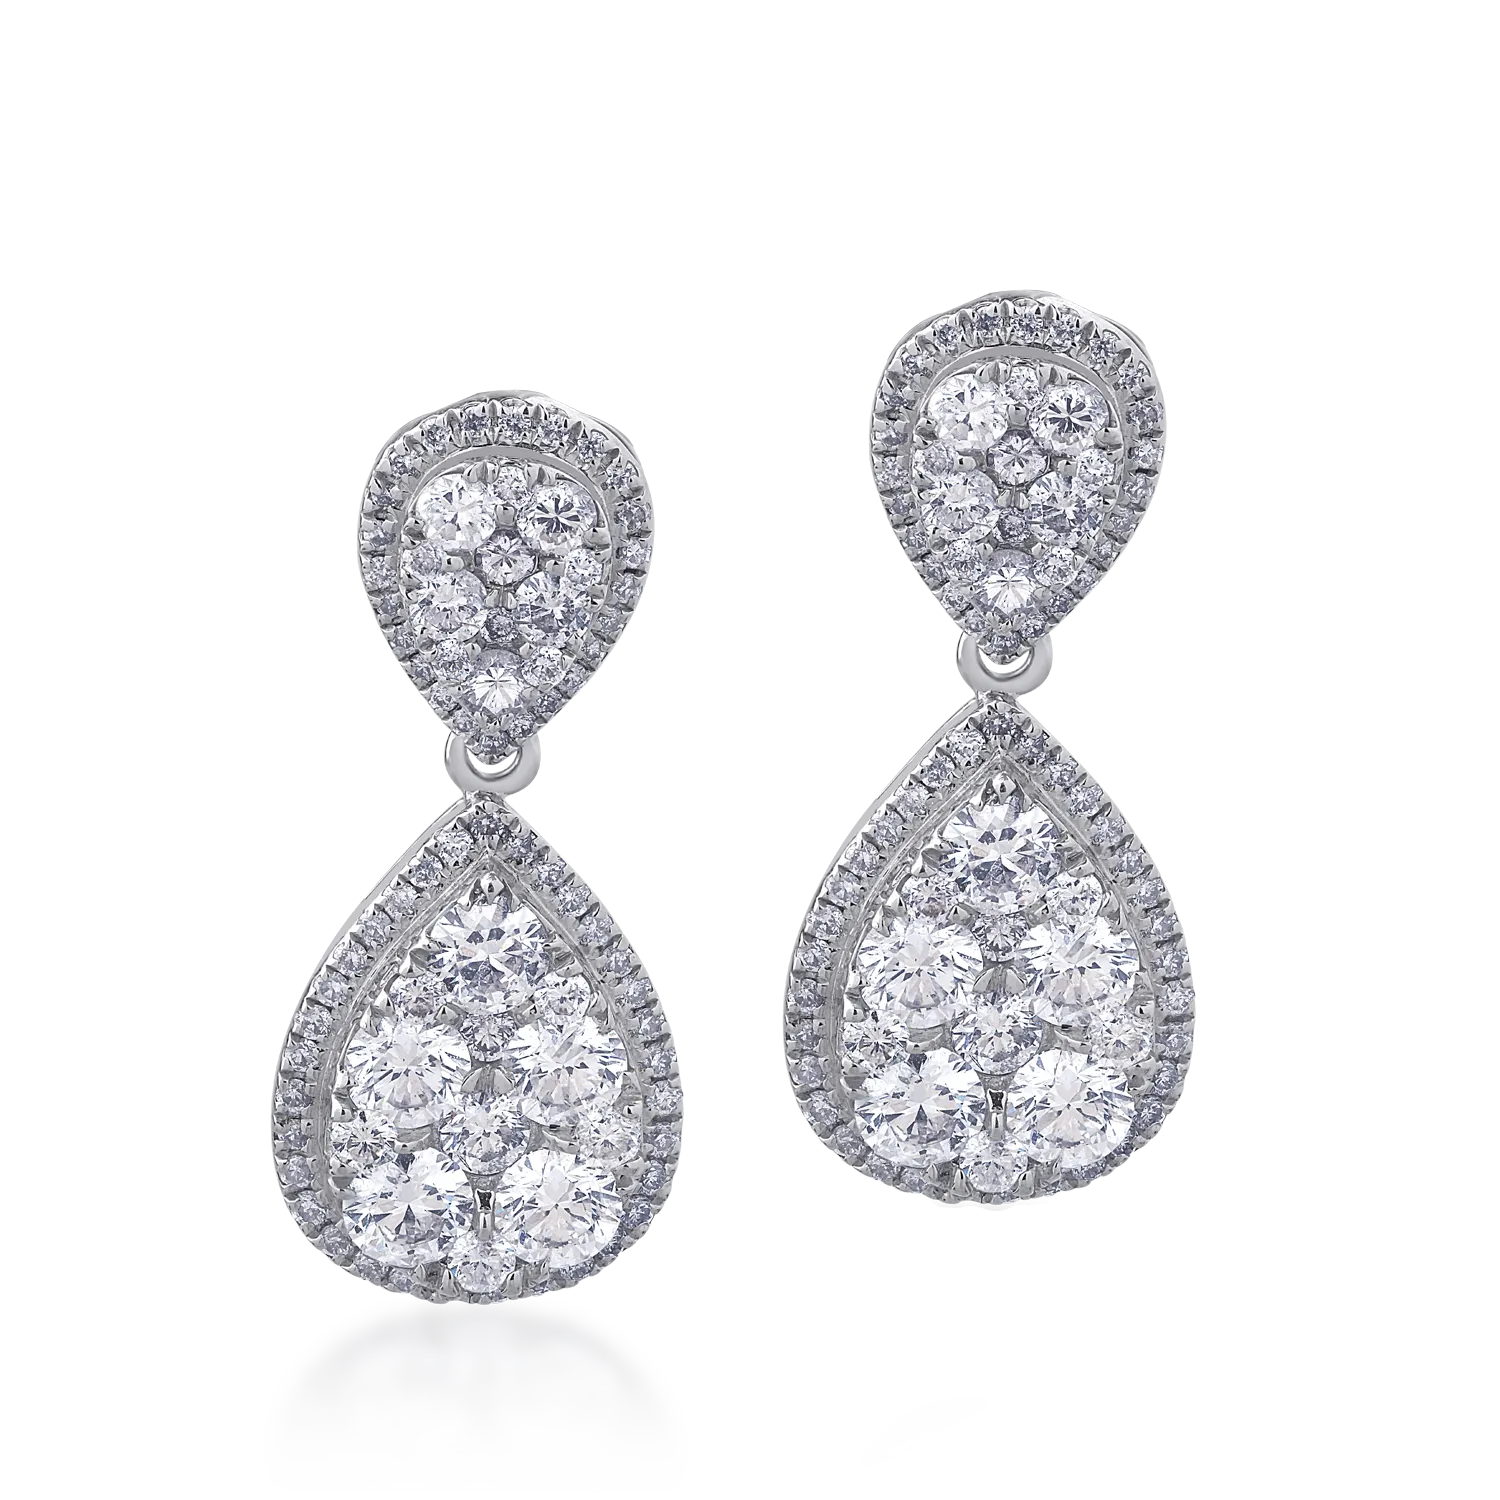 18K white gold earrings with 2.81ct diamonds